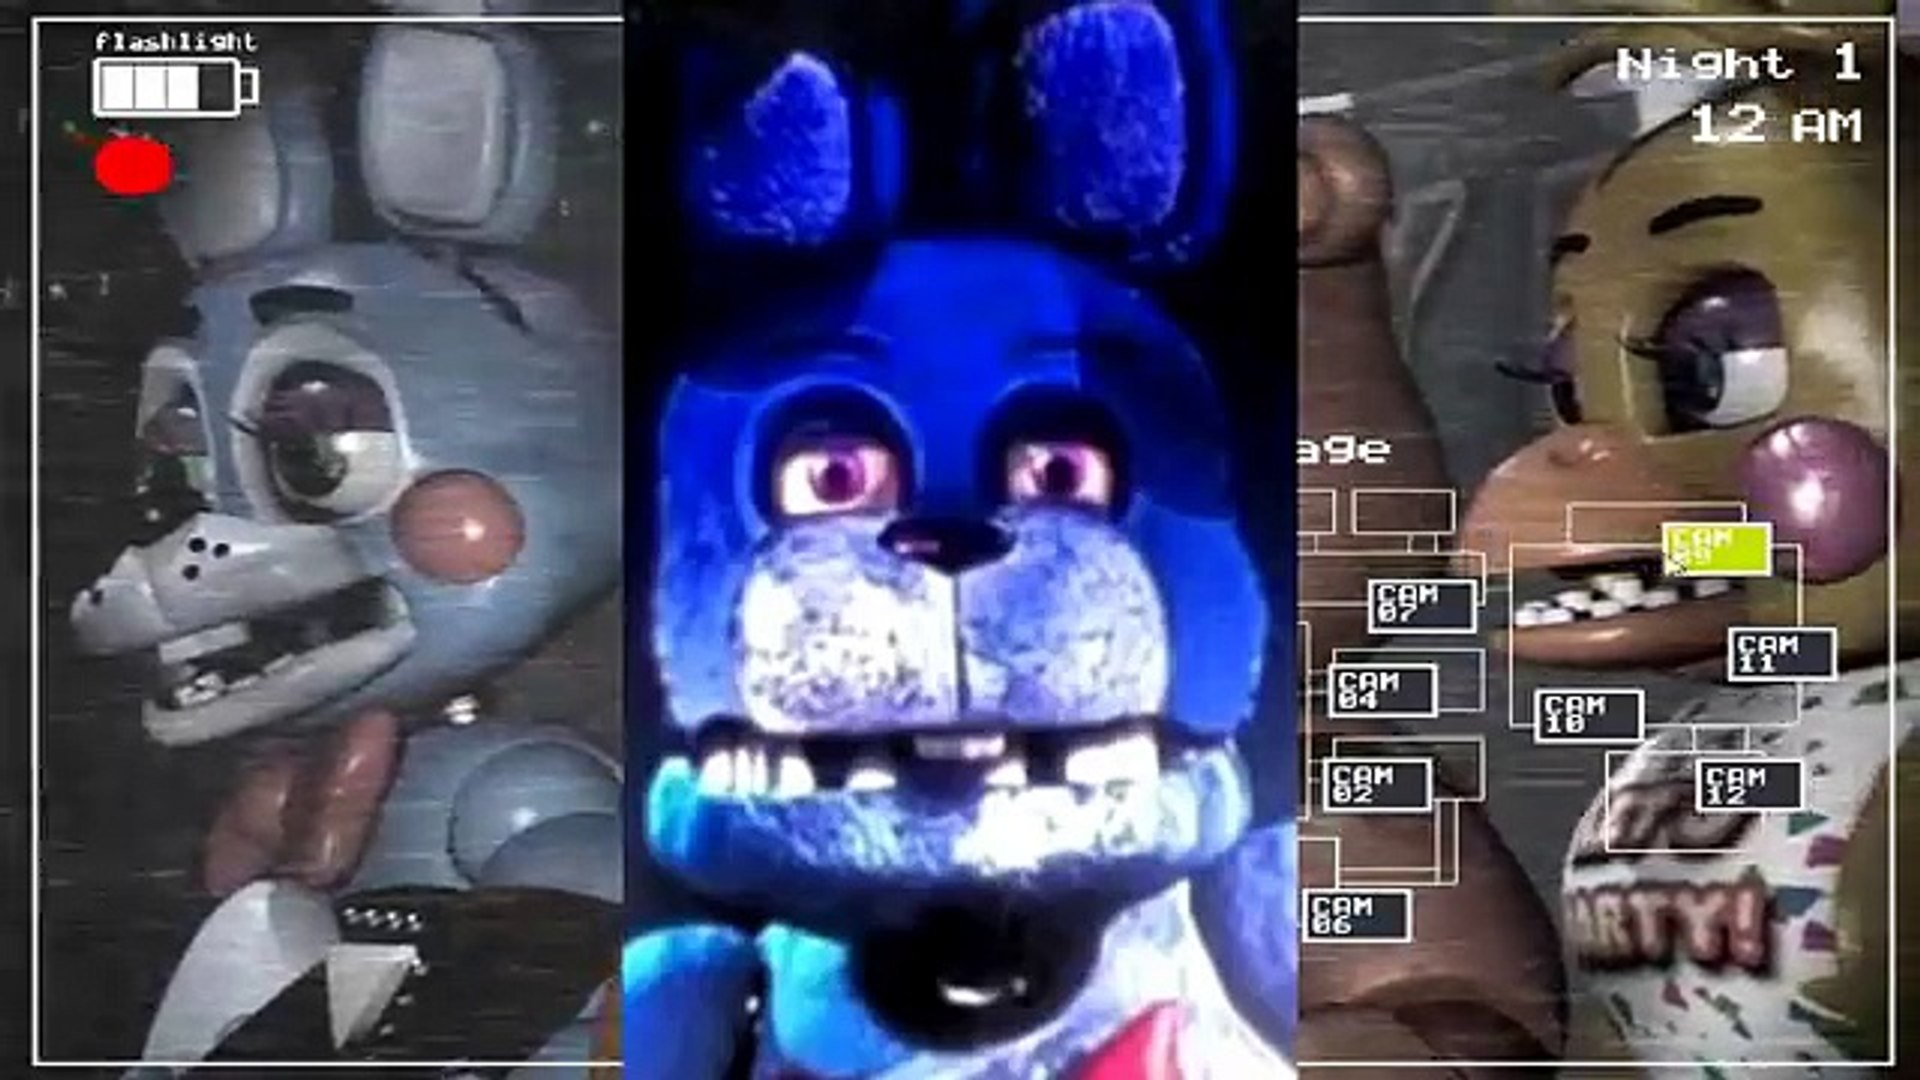 Five Nights At Freddys 3 New Gameplay Screenshots Leaked Animatronics Freddyland Real Or Fake Video Dailymotion - roblox five night s at freddy s animatronics universe fnaf 4